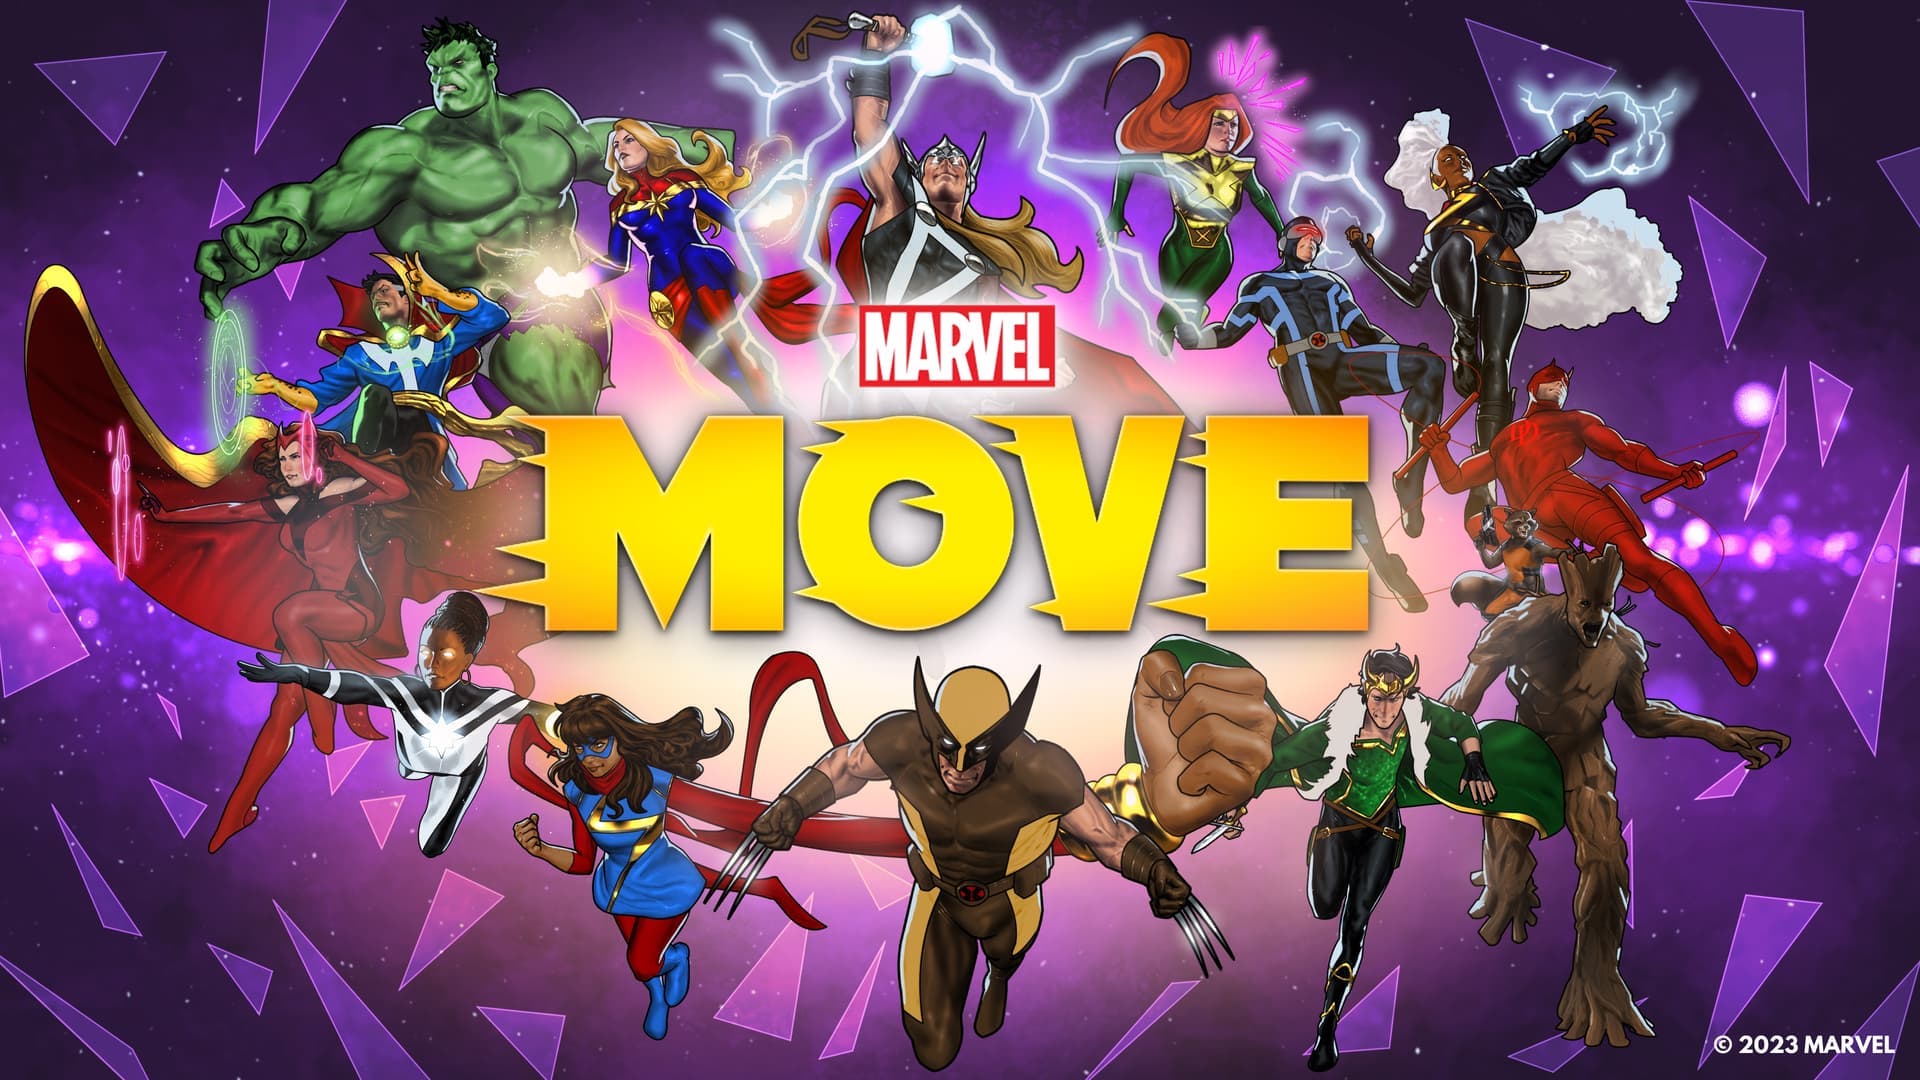 Marvel Fitness App Promises To Bring Superheroes to Your Workout